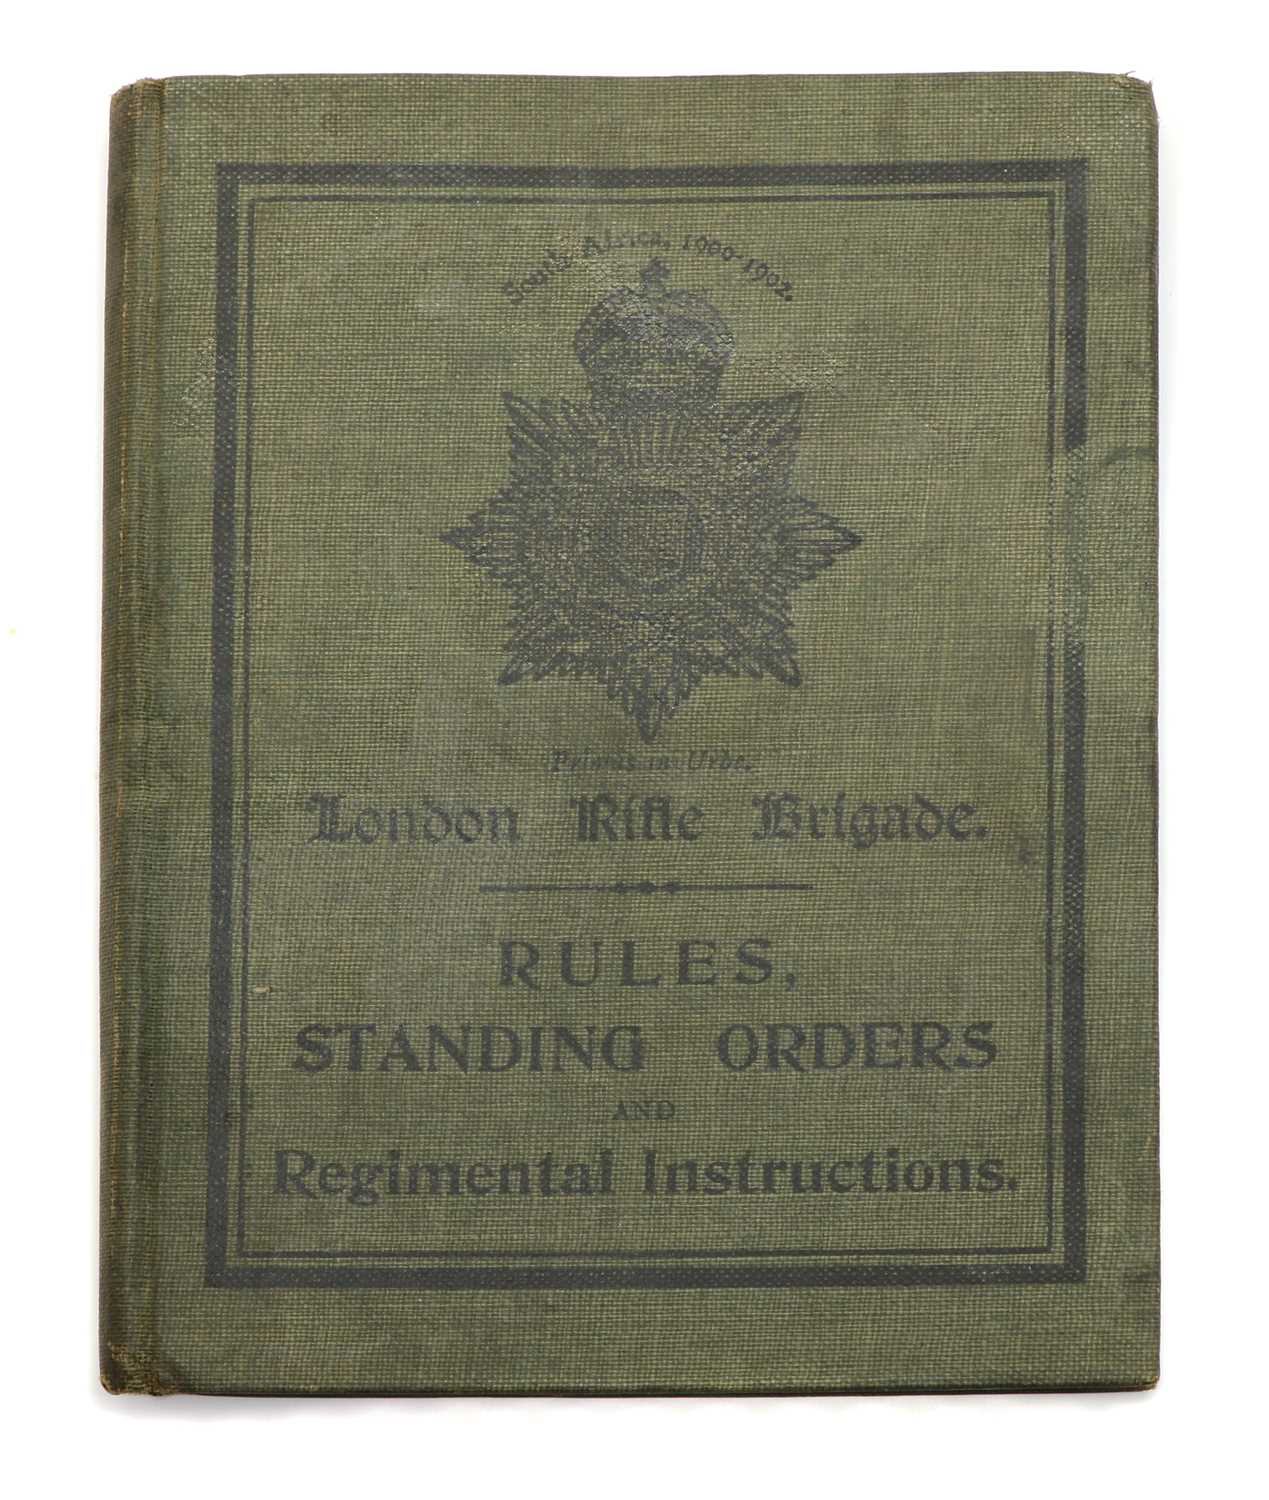 Lot 66 - A London Rifle Brigade Rules, Standing Orders and Regimental Instruction book